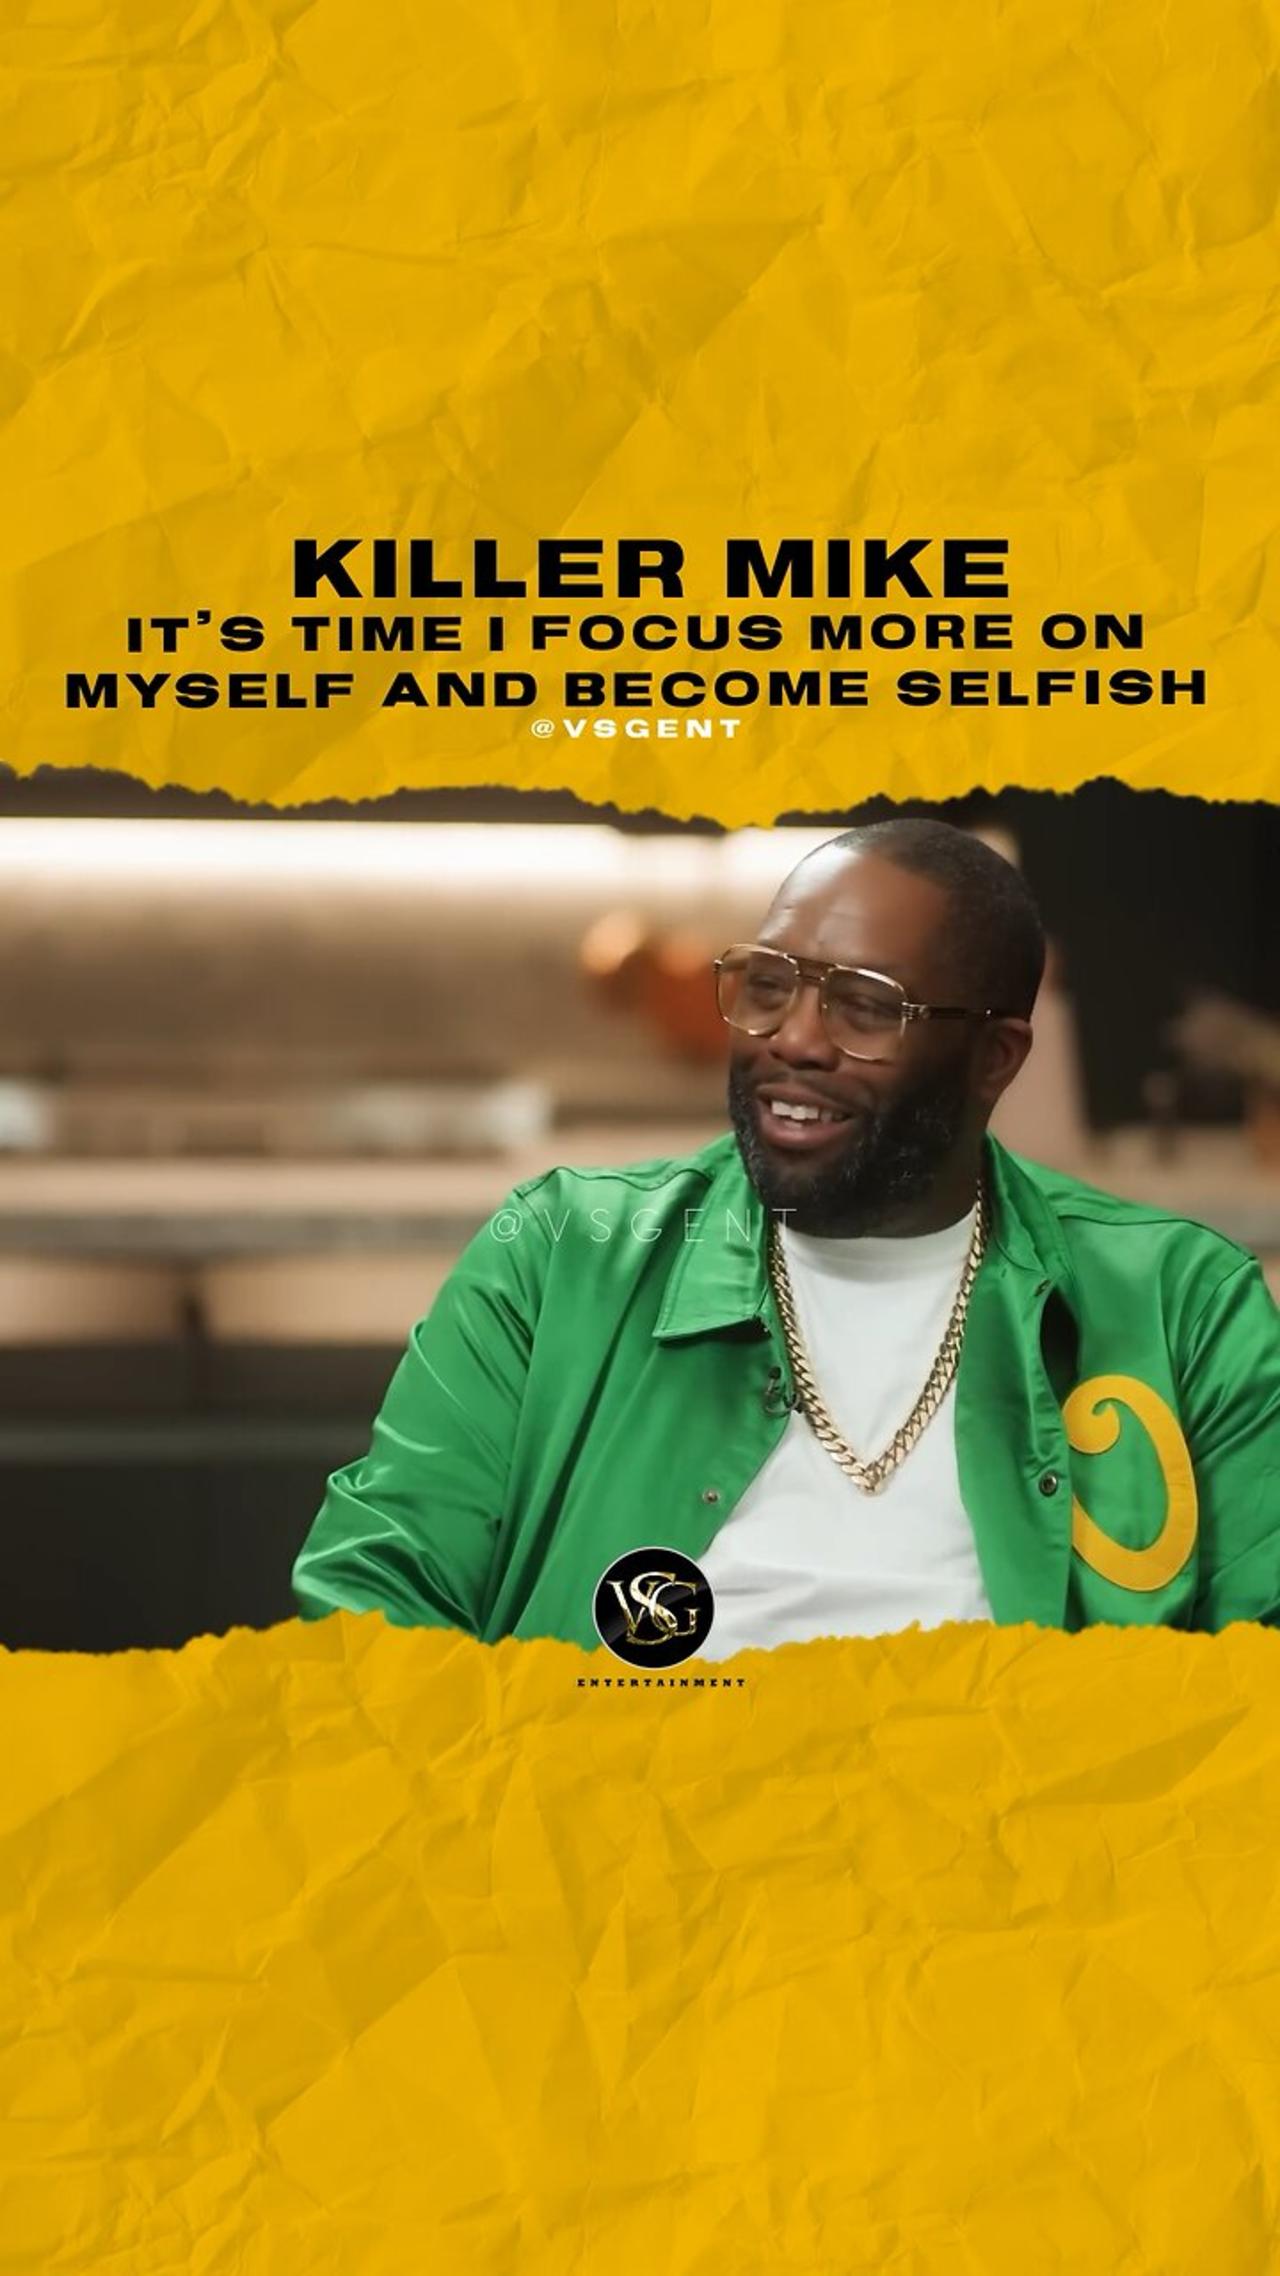 @killermike It’s time I focus more on myself and become selfish. #killermike  🎥 @angiemartinezirl